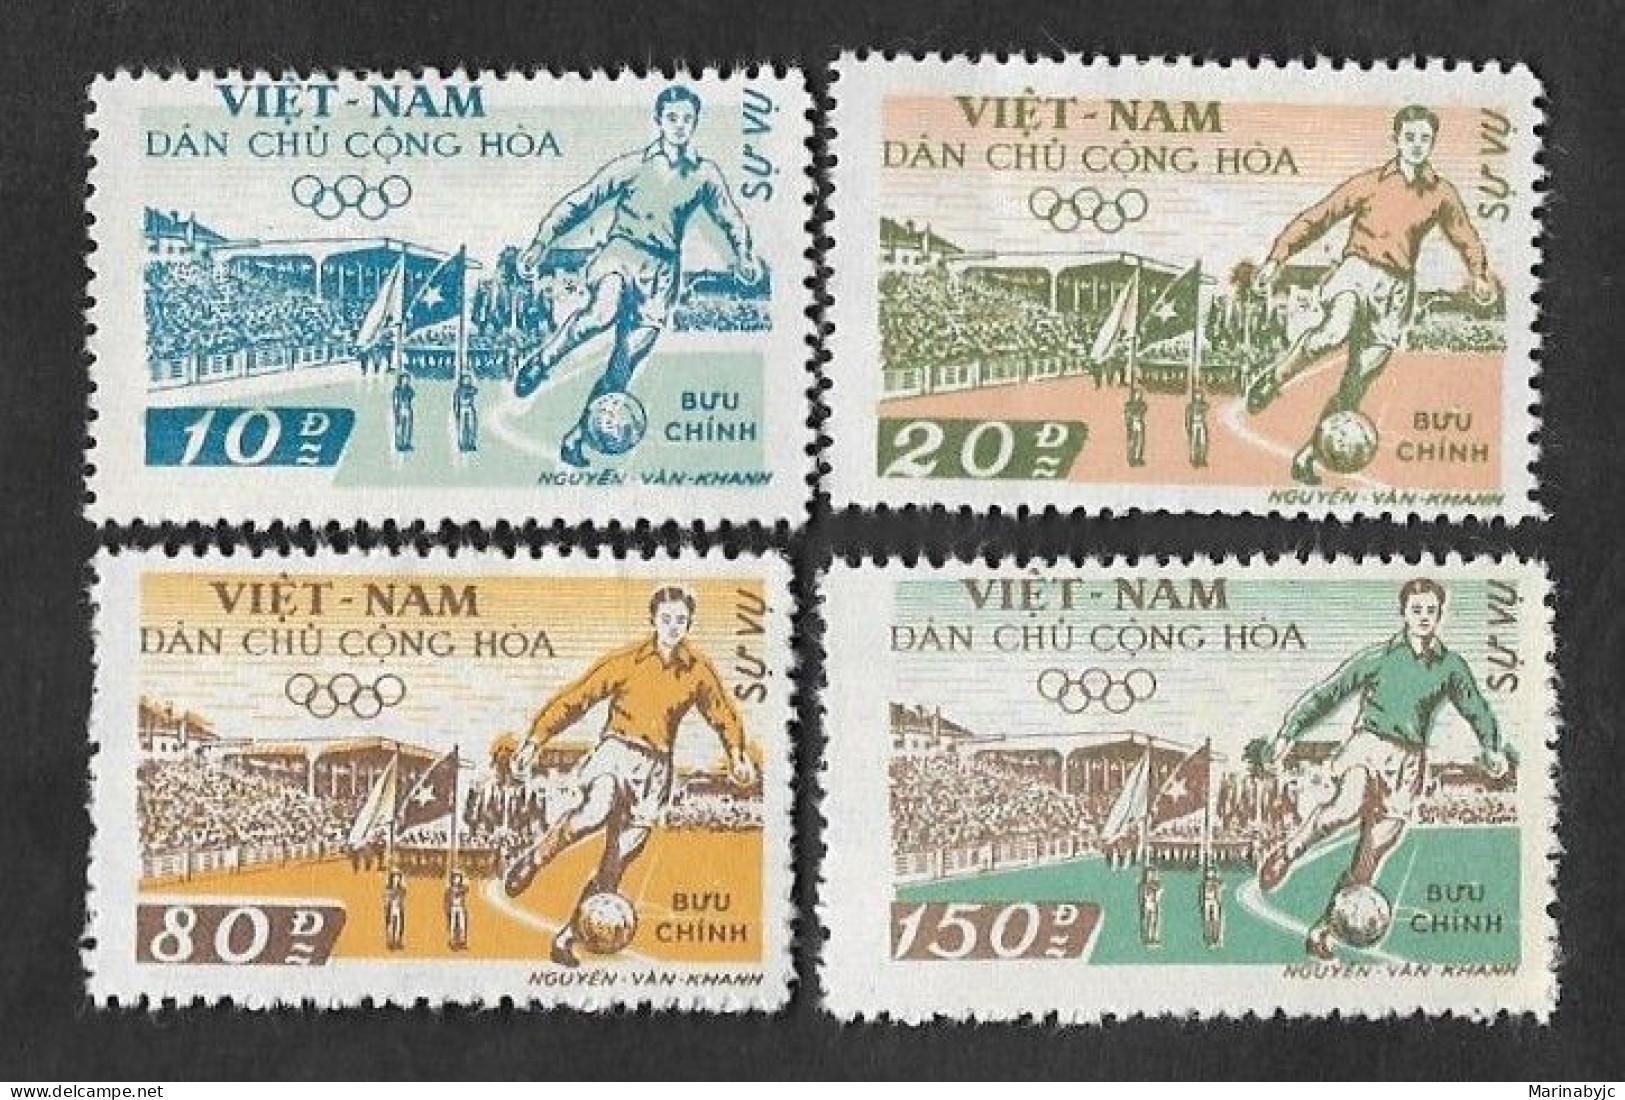 SE)1958 VIETNAM, FROM THE SPORTS SERIES, OPENING OF THE NEW HANOI STADIUM, FOOTBALL, 4 MINT STAMPS - Vietnam